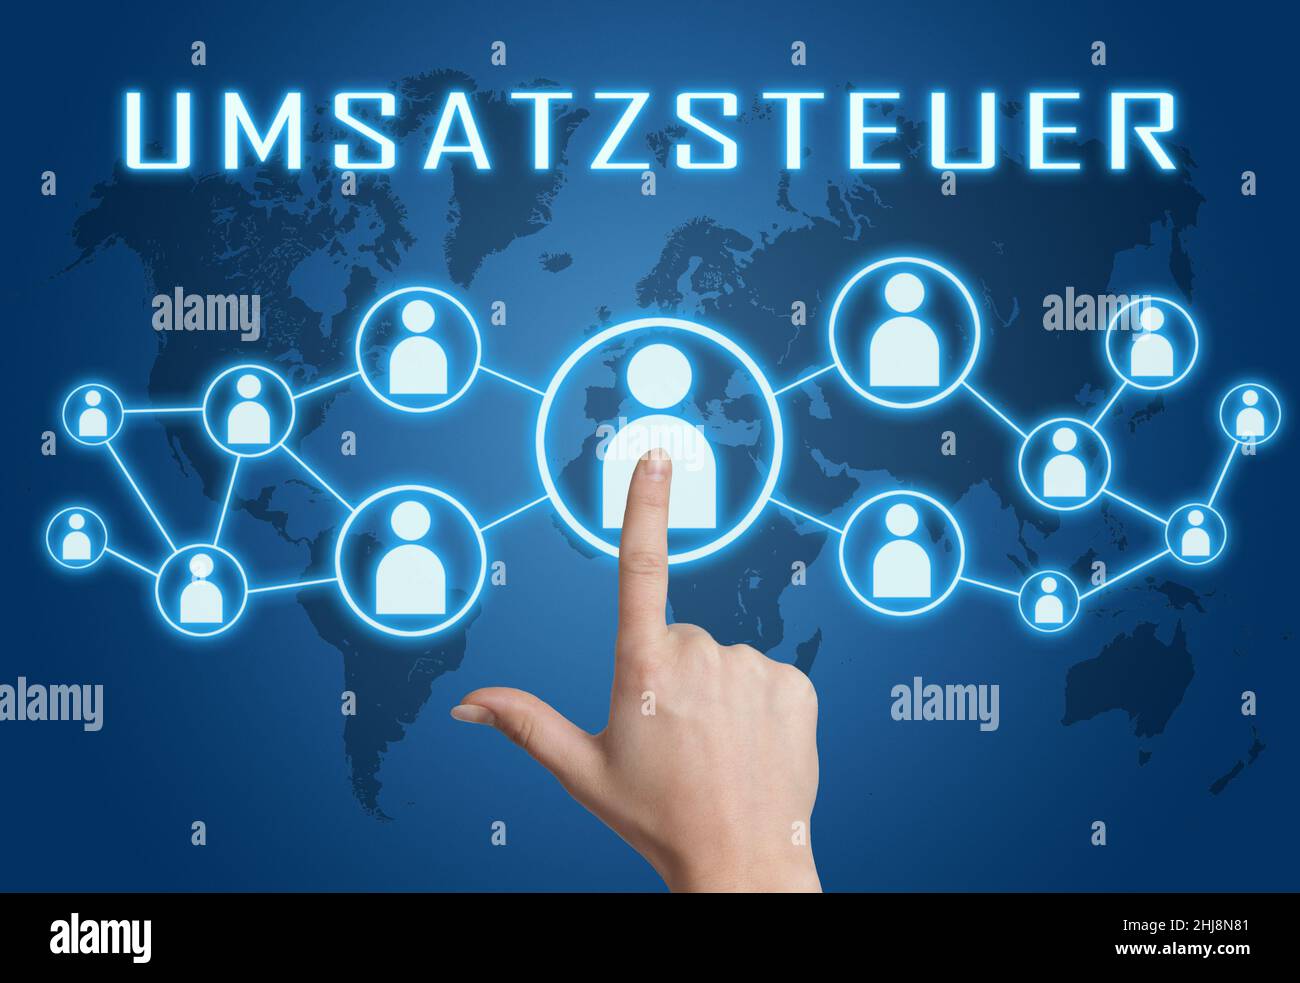 Umsatzsteuer - german word for sales tax or VAT - text concept with hand pressing social icons on blue world map background. Stock Photo